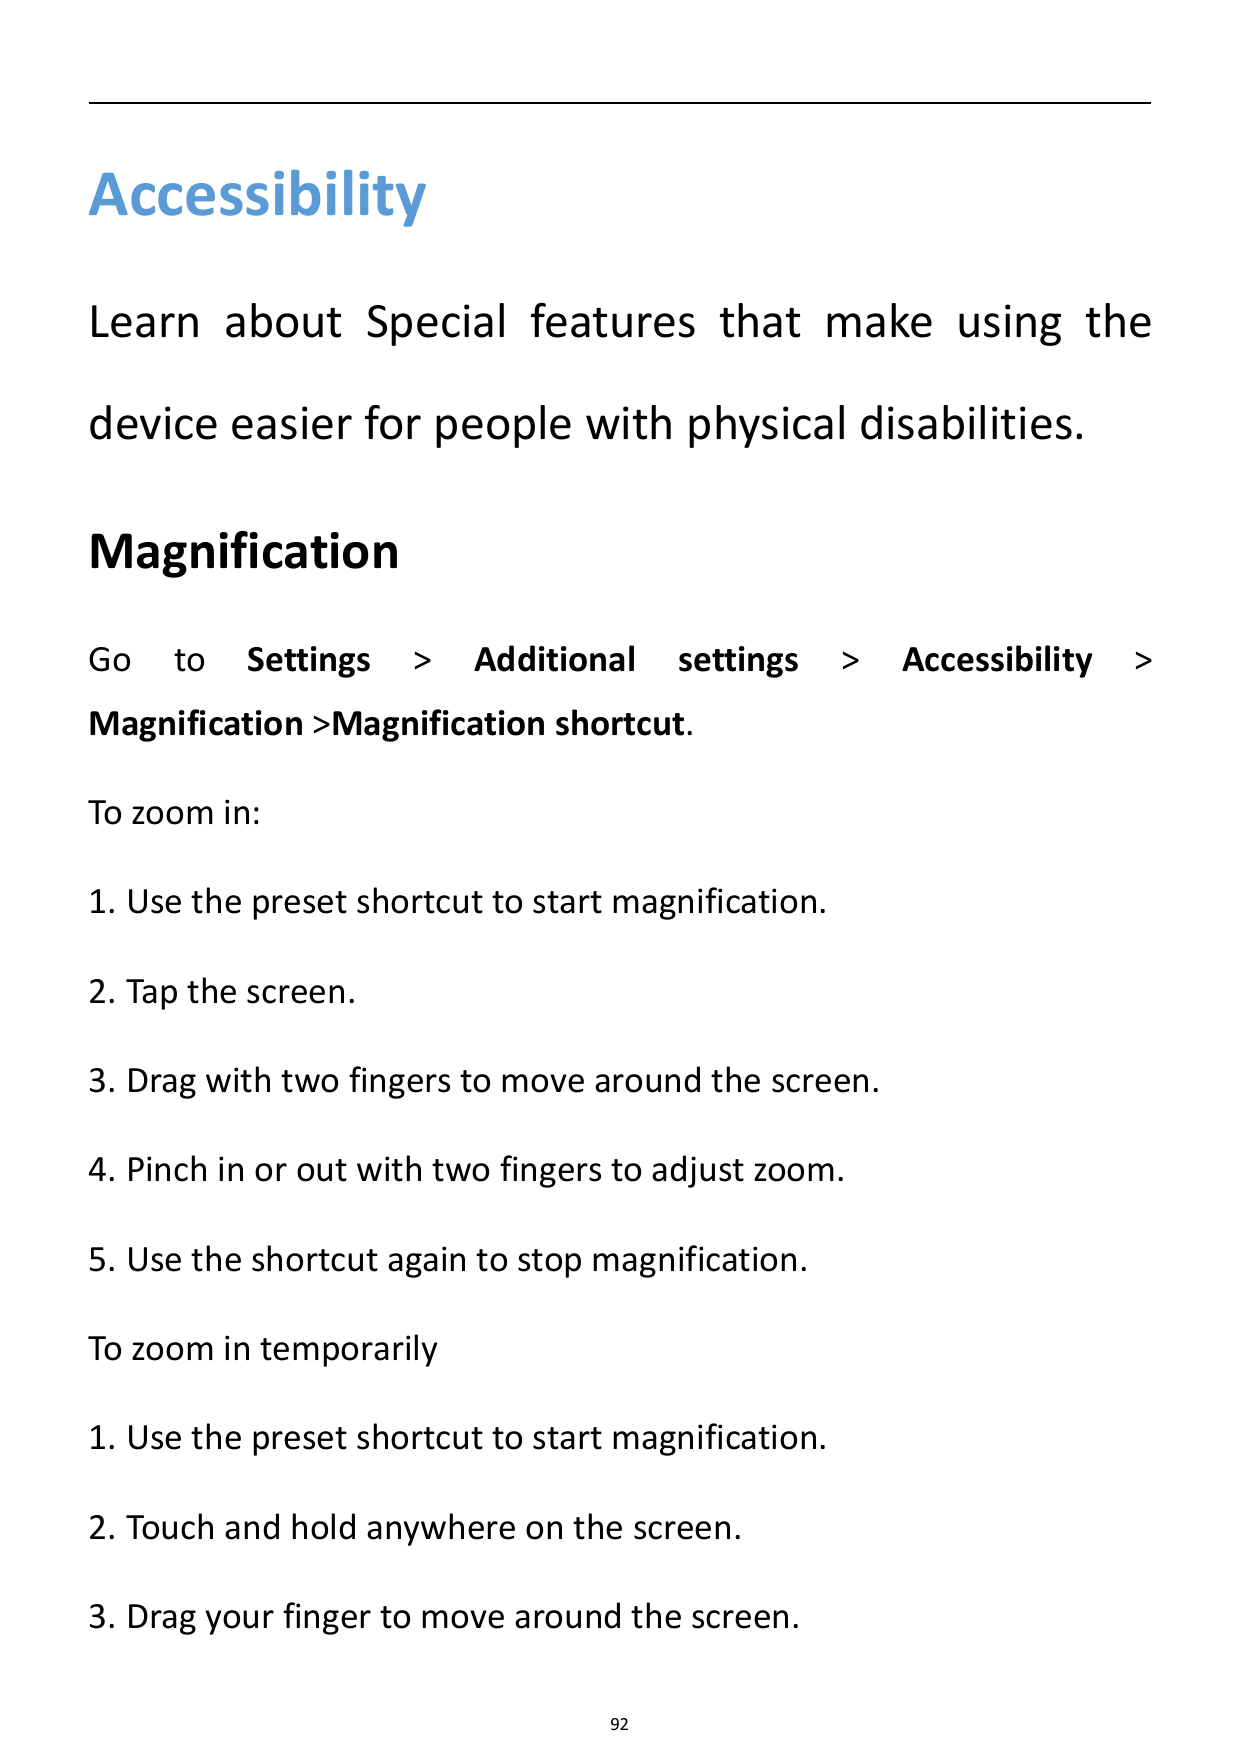 AccessibilityLearn about Special features that make using thedevice easier for people with physical disabilities.MagnificationGo